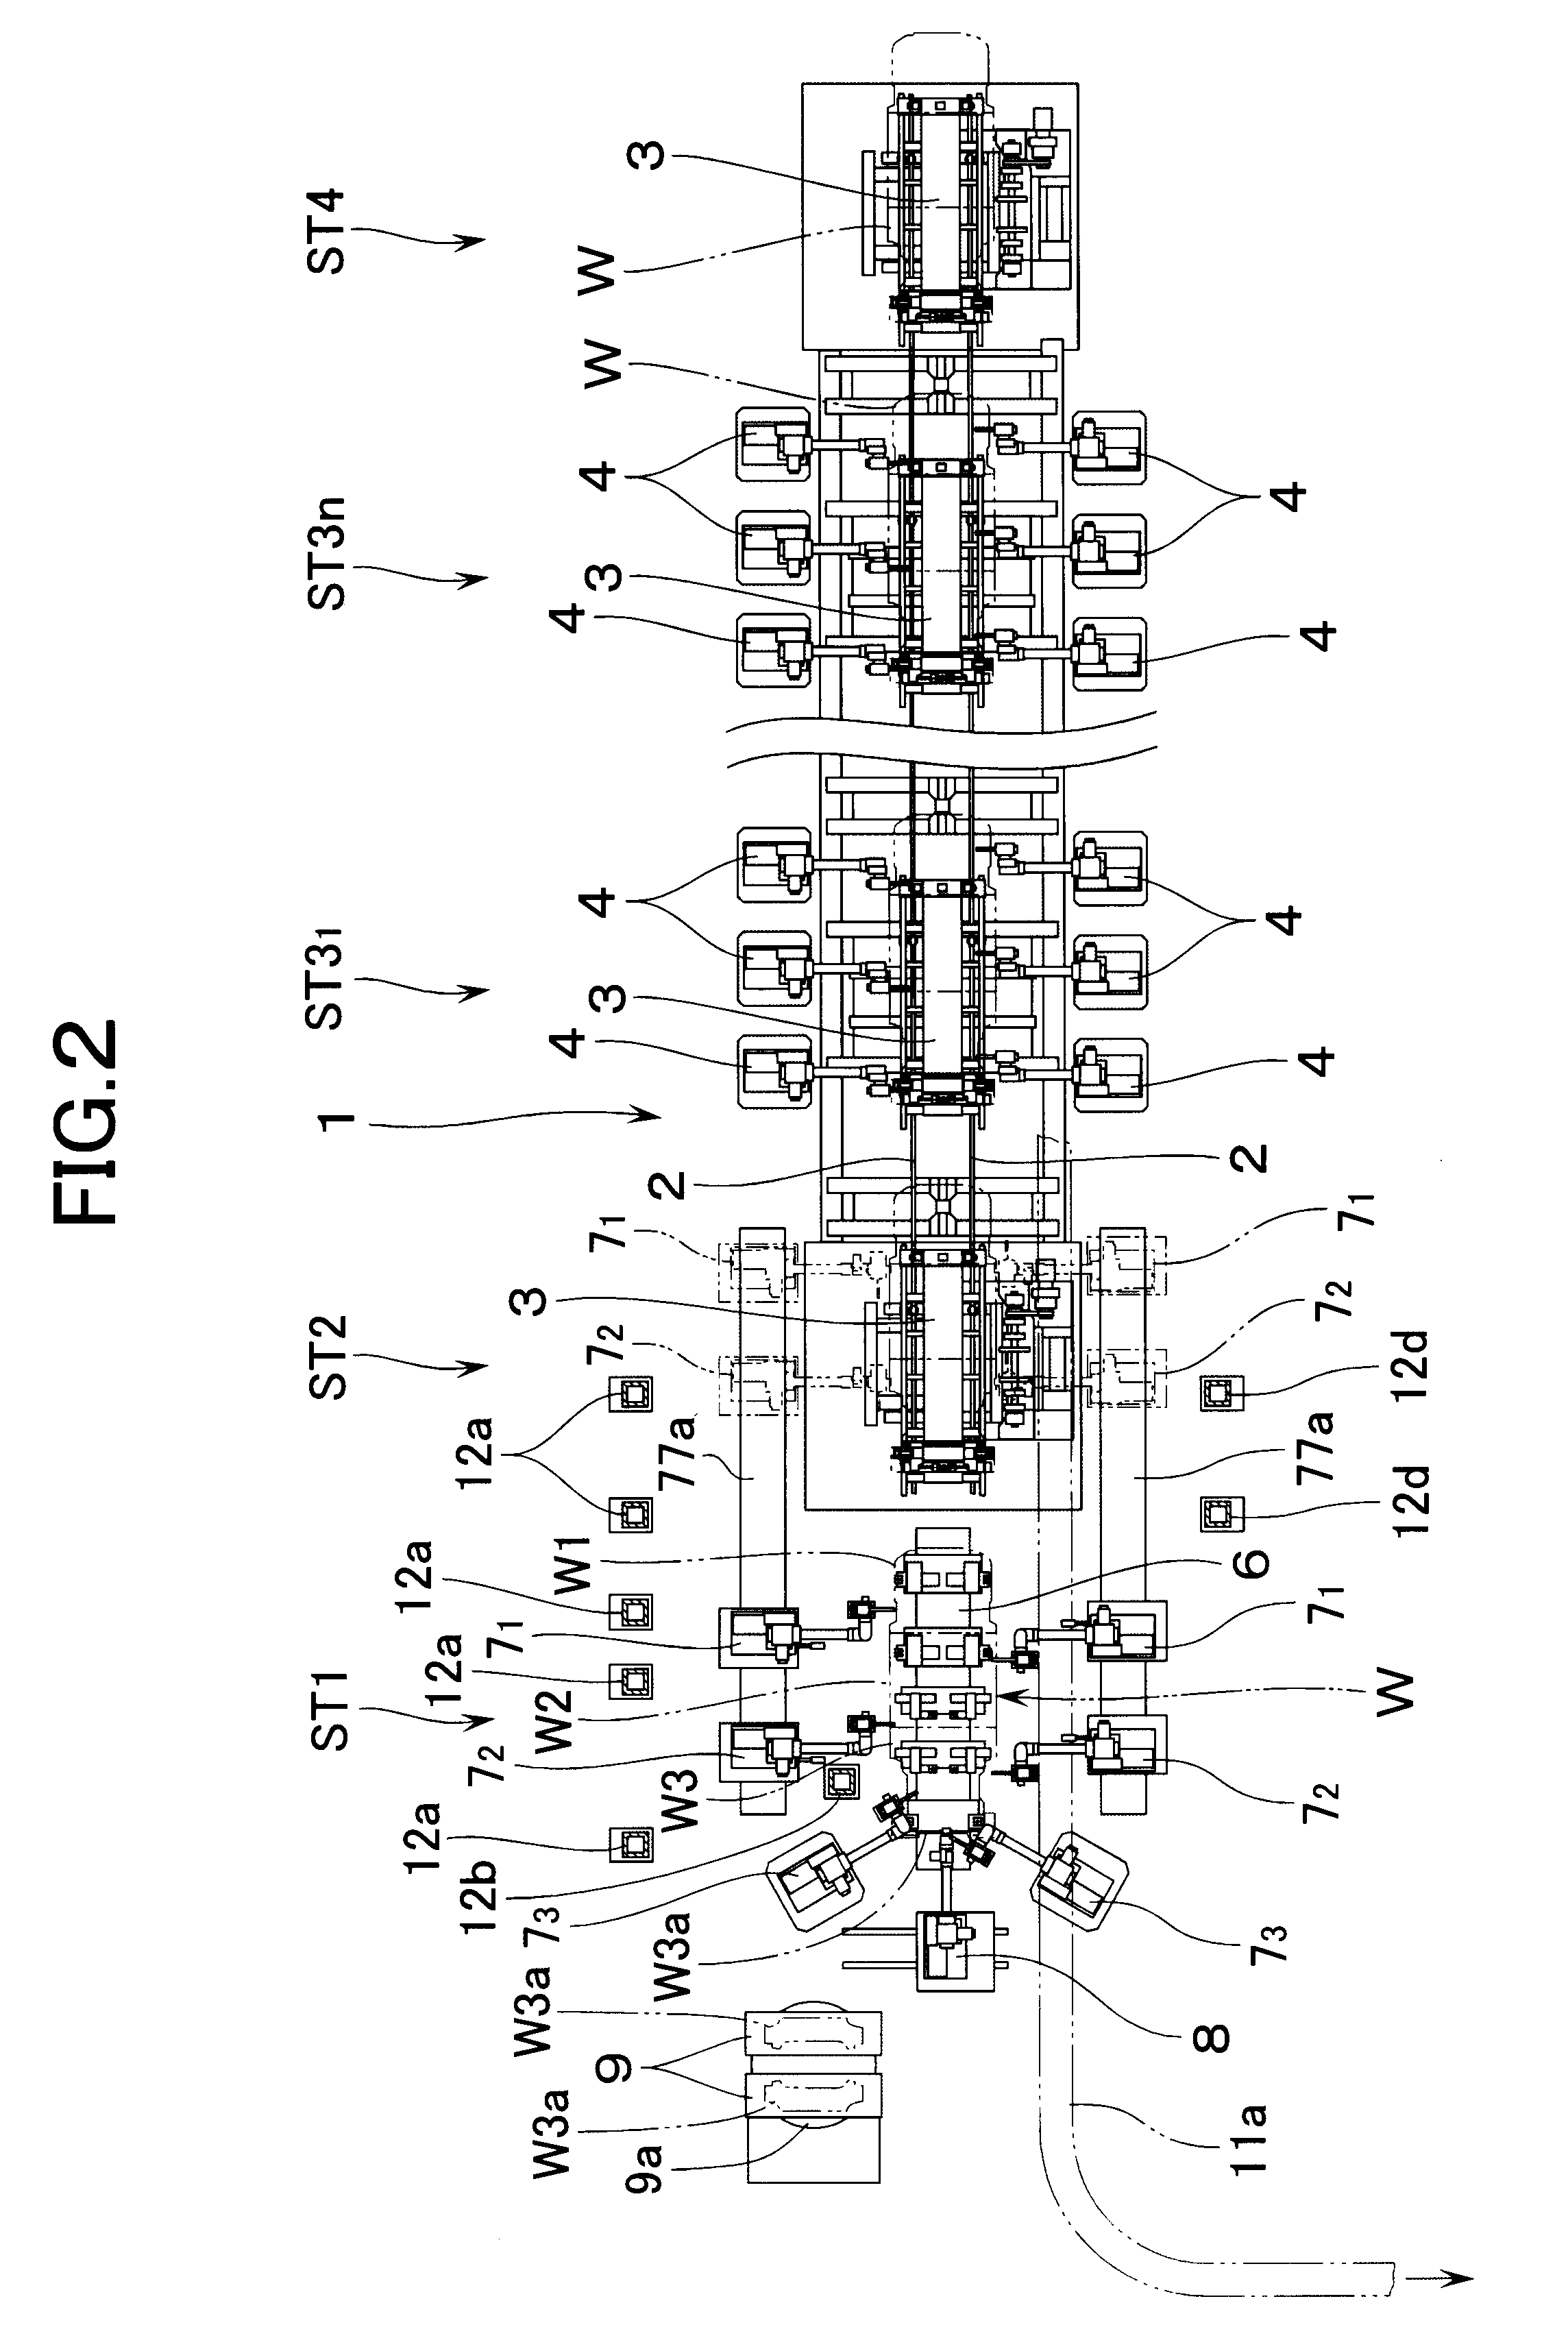 Apparatus for assembling floor of vehicle